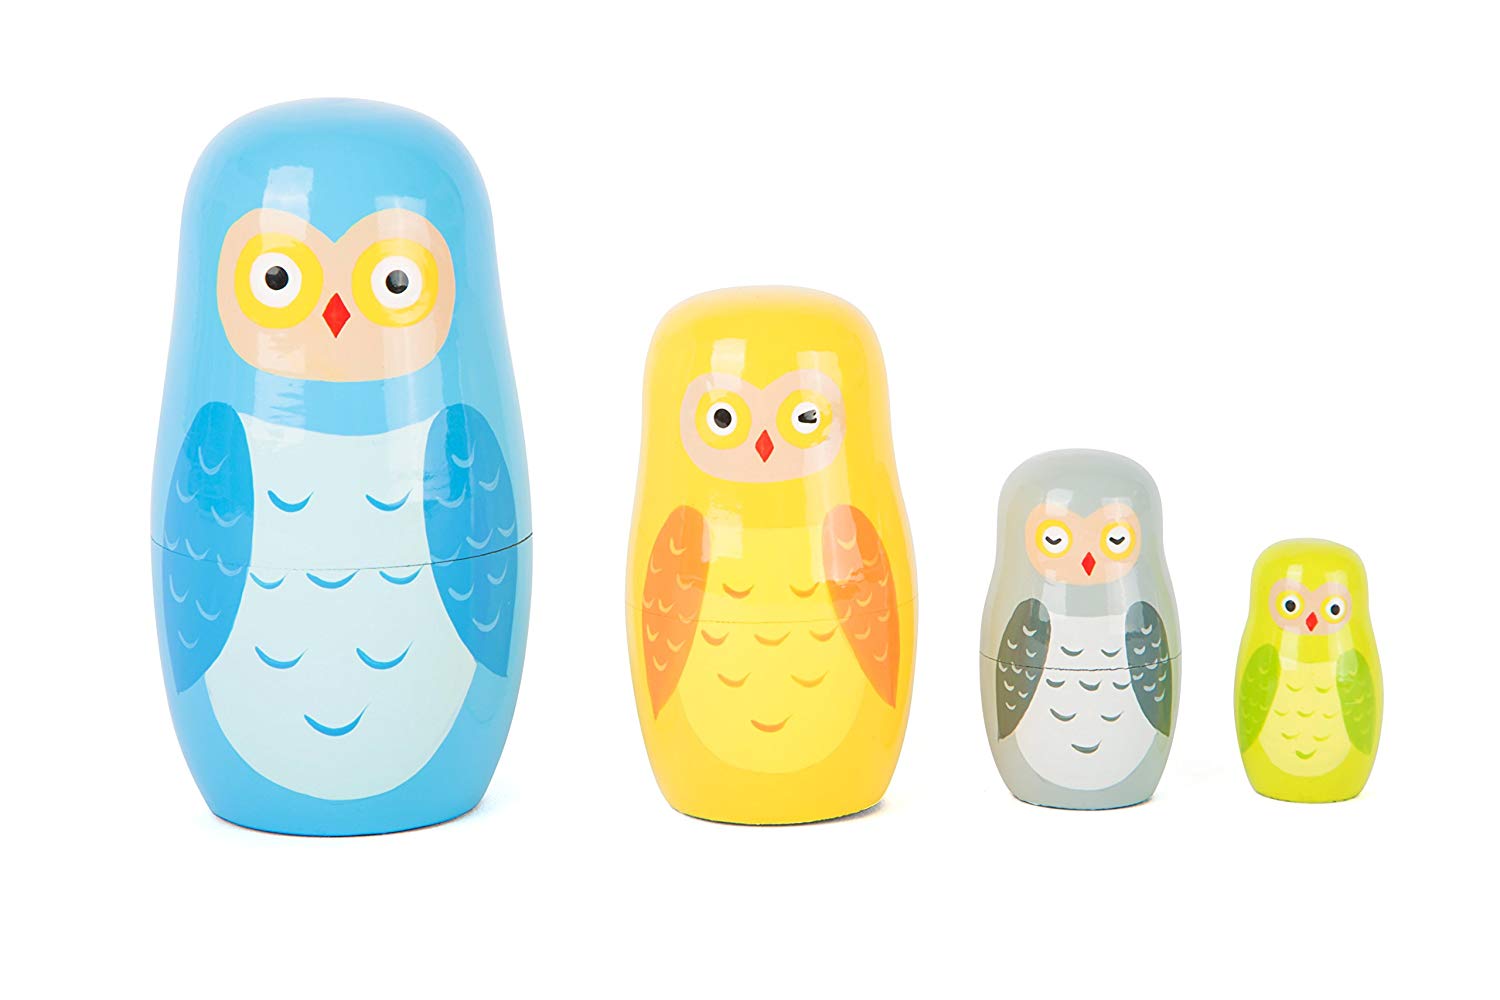 Small Foot by Legler Russian Owl Doll